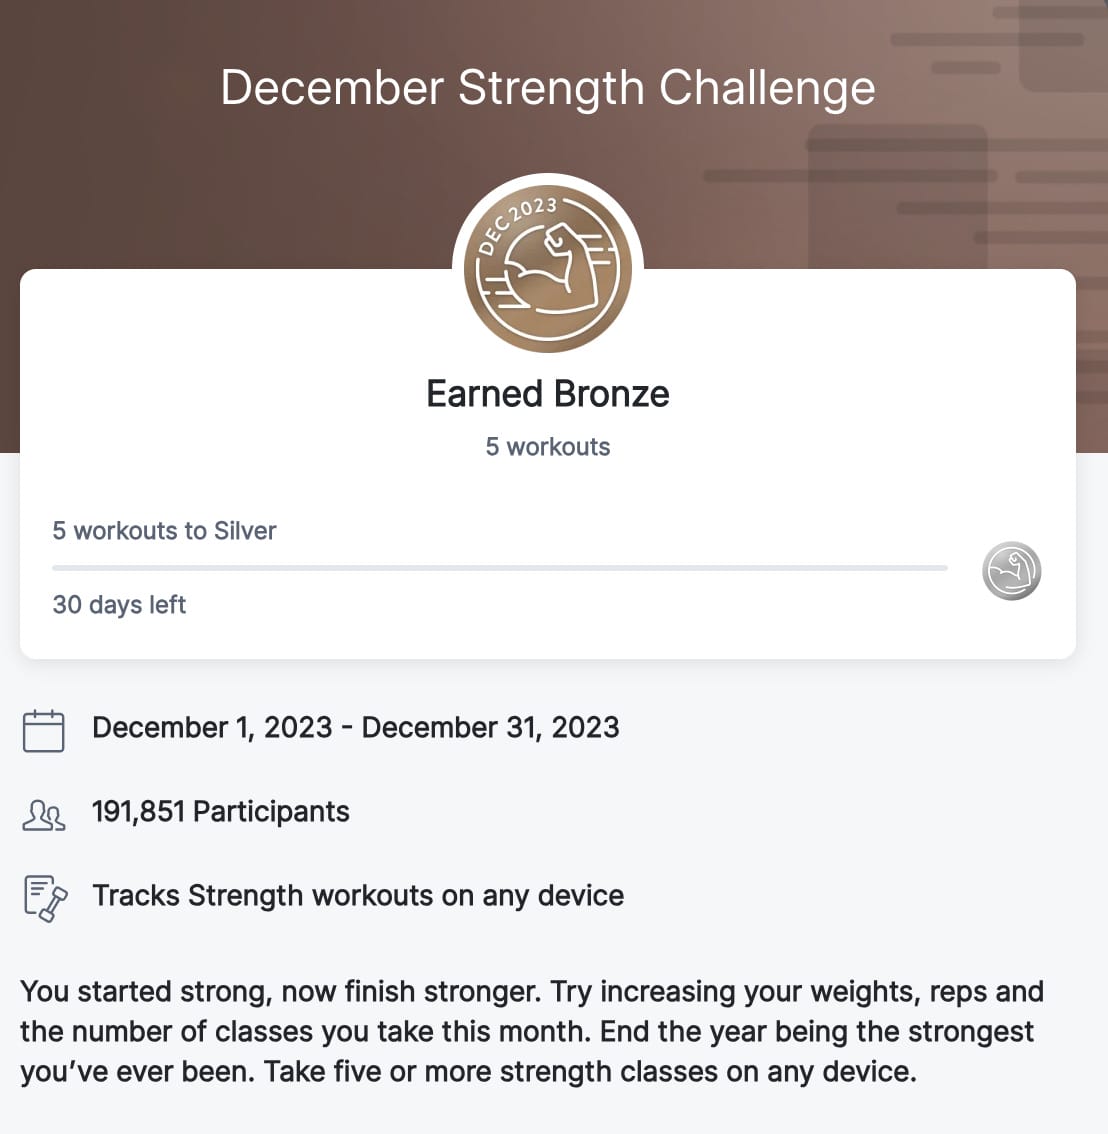 December 2023 Strength Challenge showing bronze level earned, even though only 1 strength class has been completed for this member.